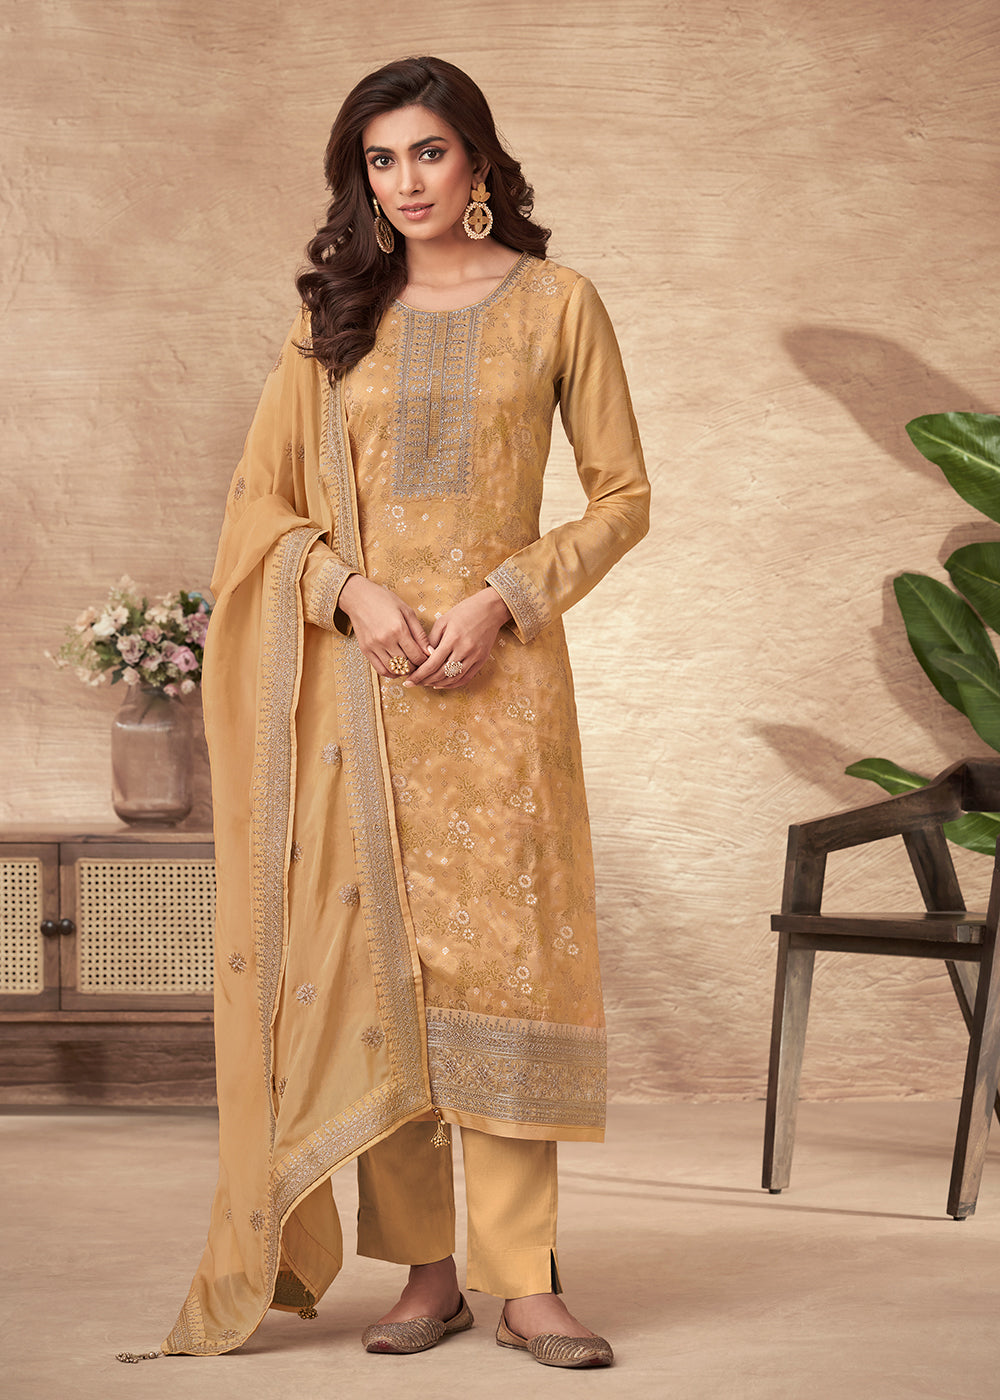 Buy Now Embroidered Yellow Viscose Jacquard Pant Style Salwar Suit Online in USA, UK, Canada, Germany, Australia & Worldwide at Empress Clothing. 